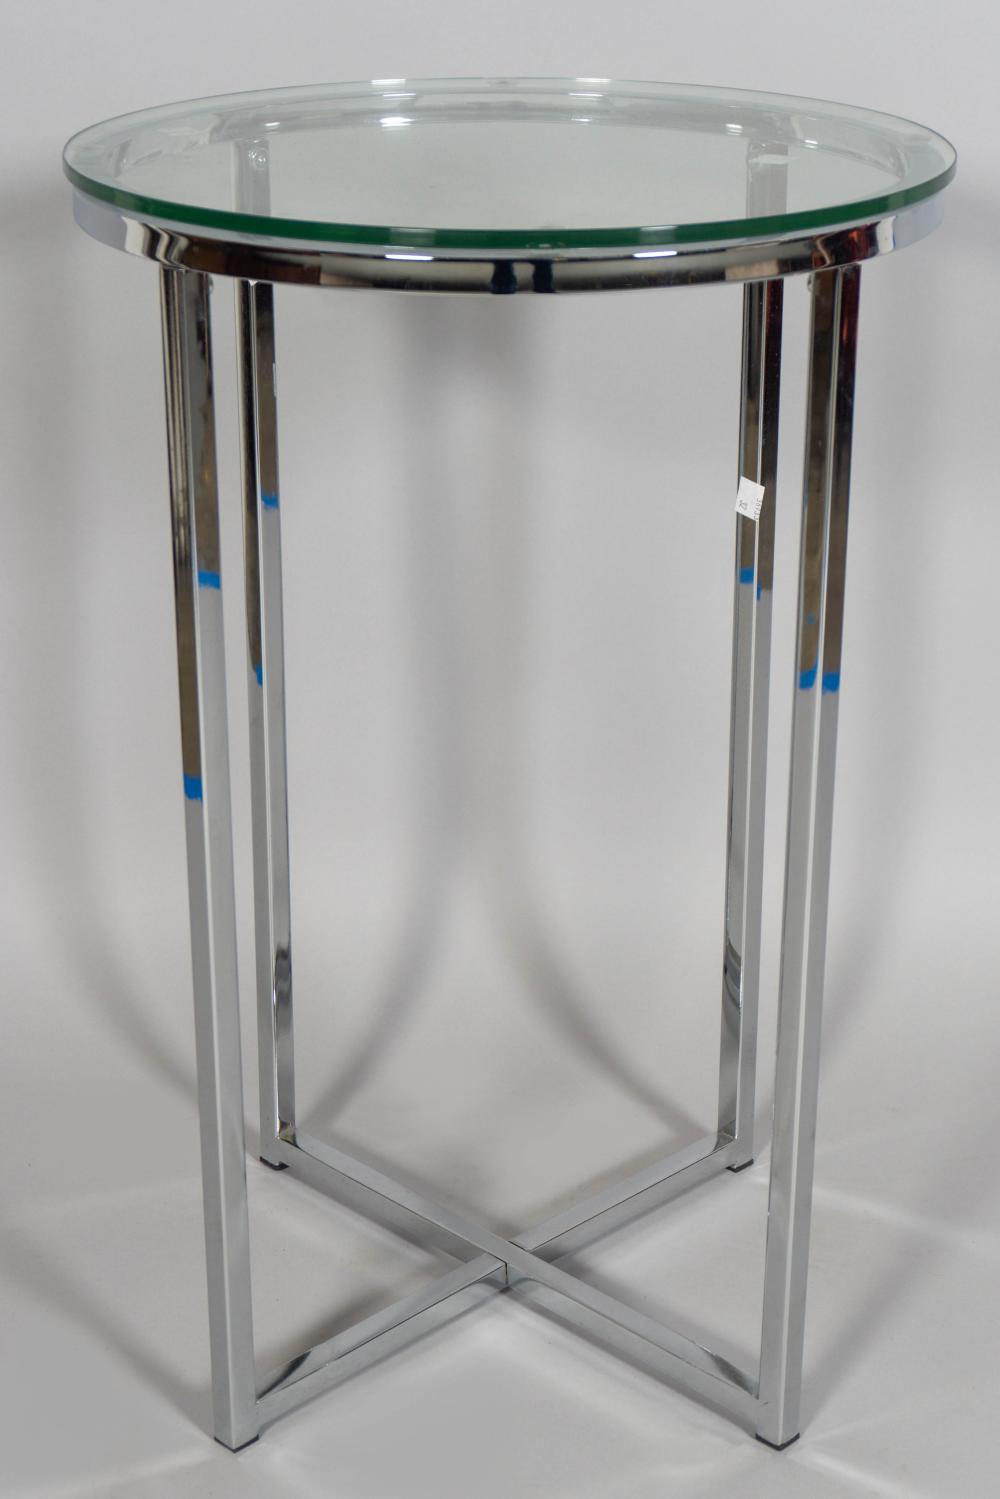 CONTEMPORARY CHROME SIDE TABLE 33cccb